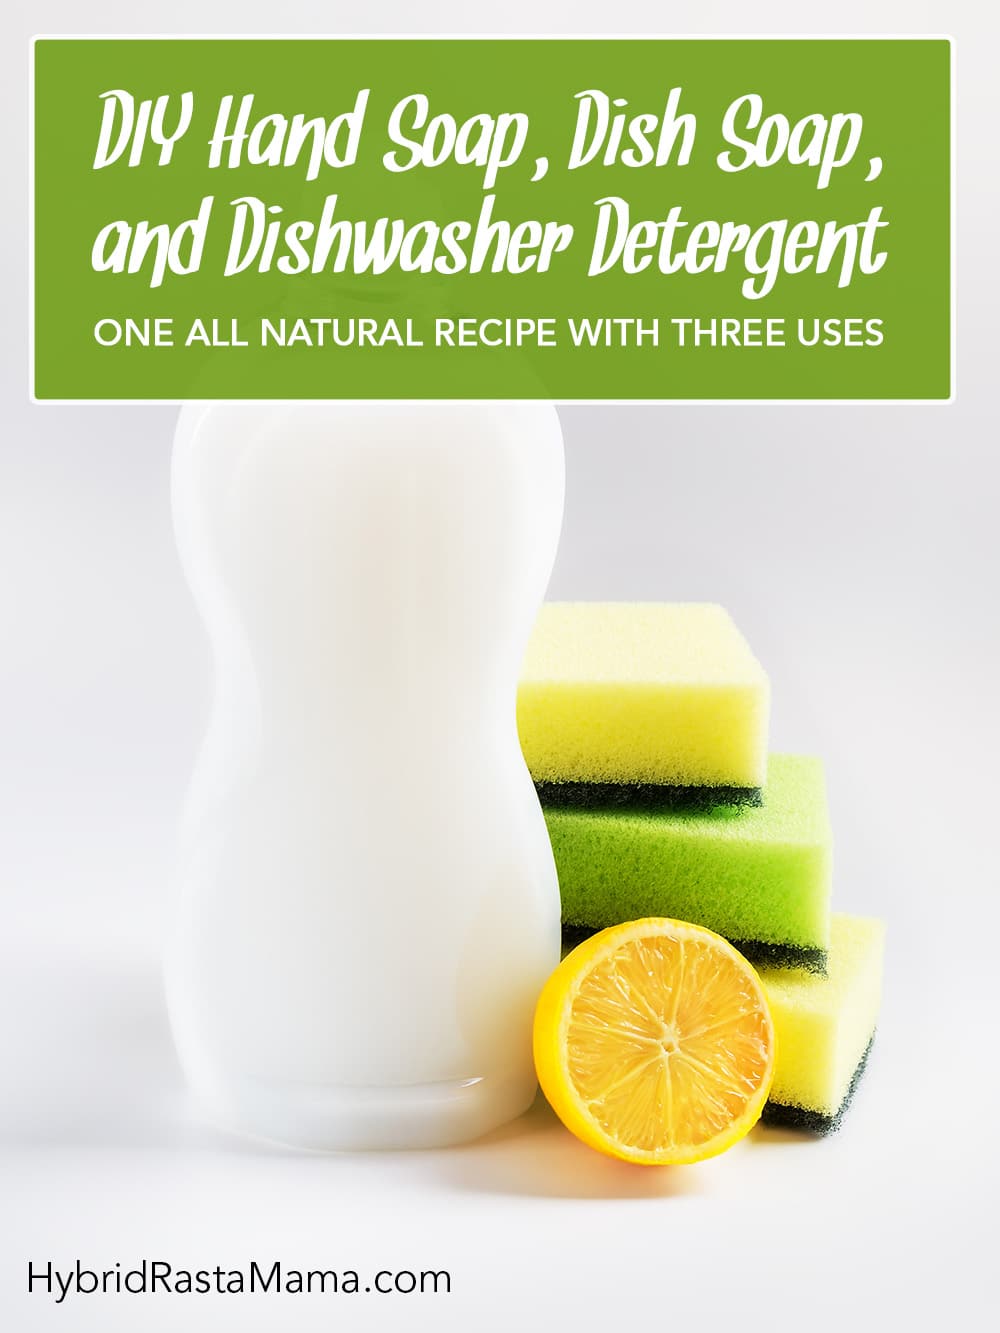 A bottle of DIY 3 in 1 soap - hand soap, dish soap, and dishwasher detergent.